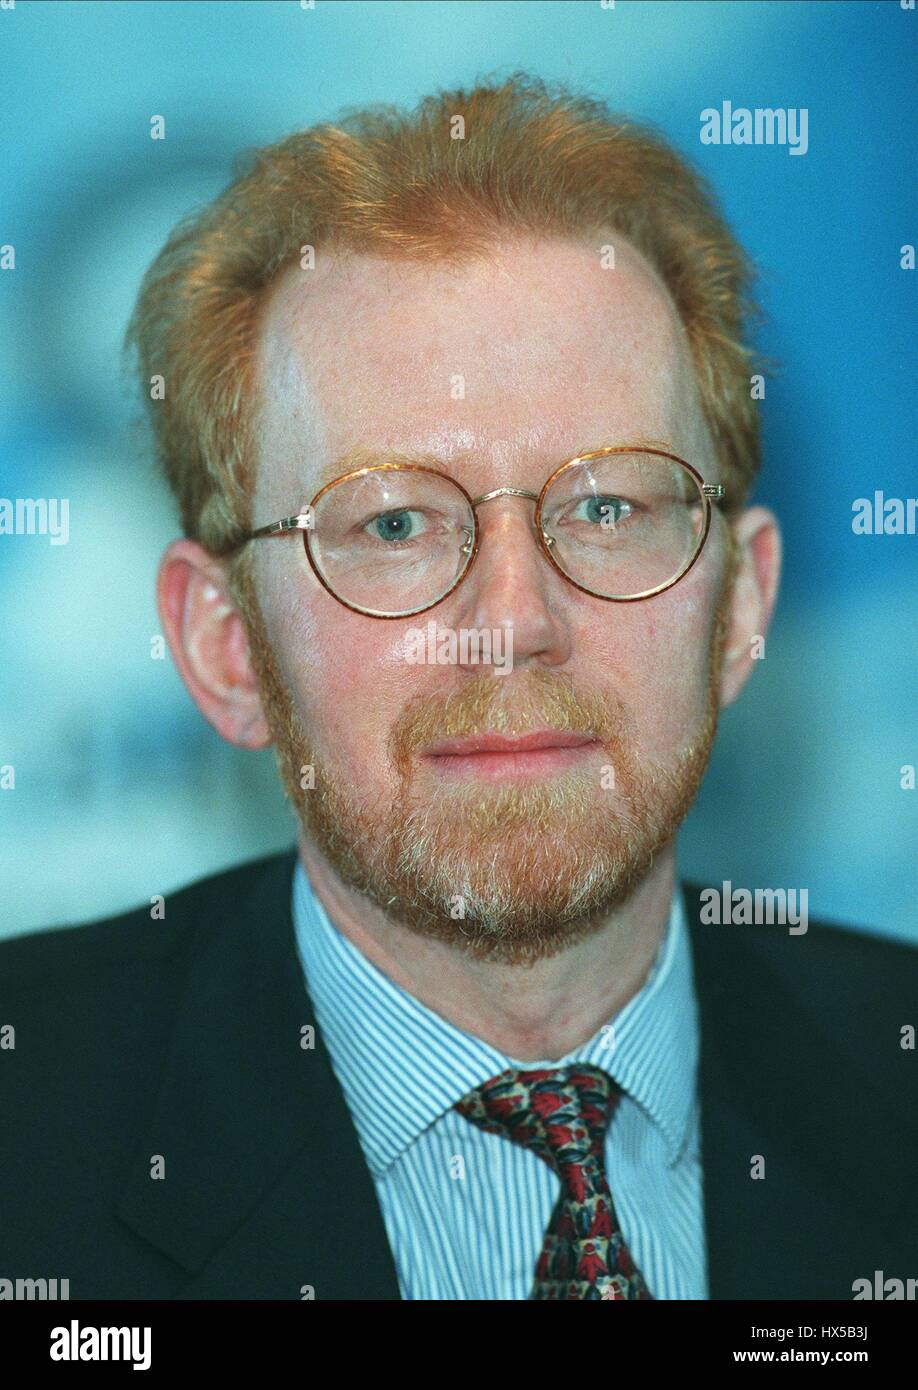 MARK WOOD EDITOR IN CHIEF 'REUTERS' 13 June 1995 Stock Photo